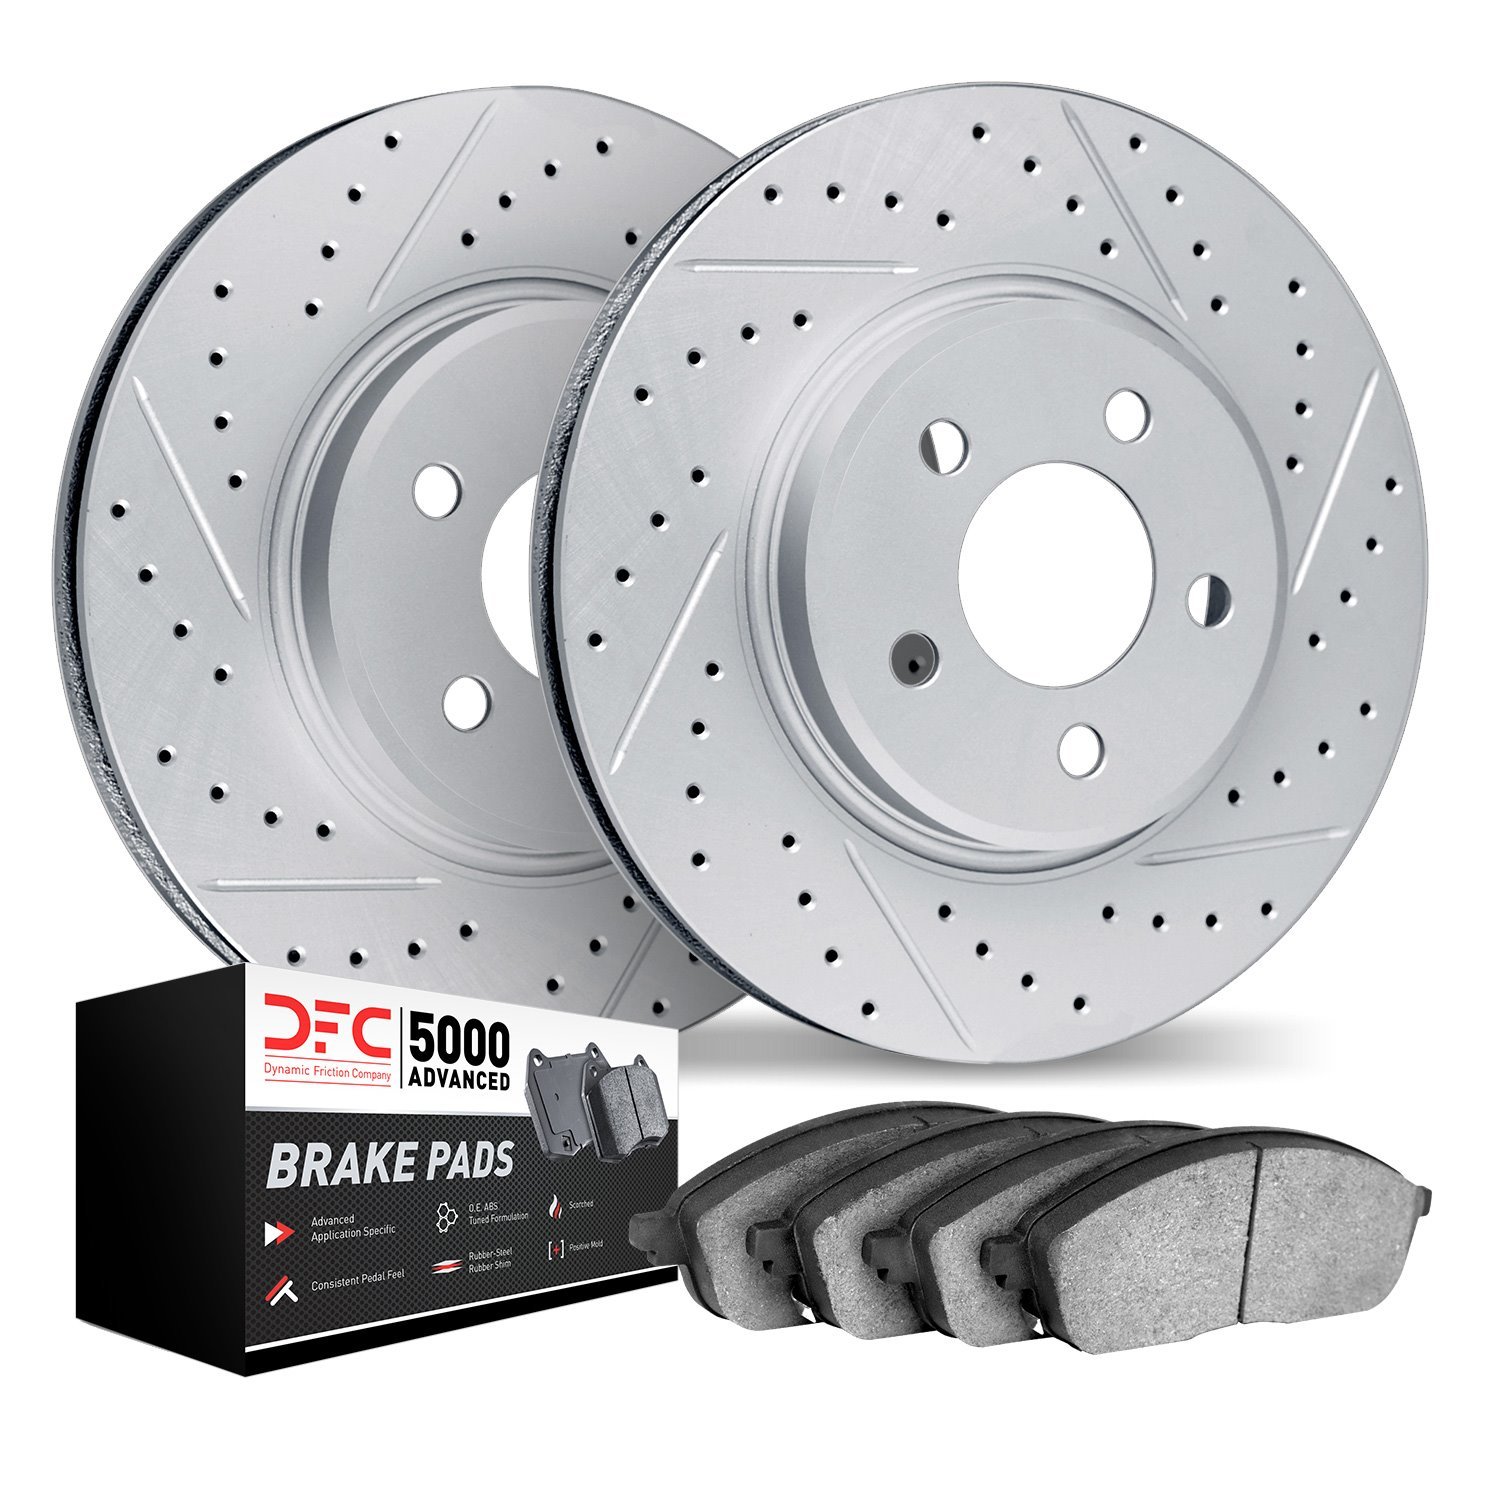 2502-63077 Geoperformance Drilled/Slotted Rotors w/5000 Advanced Brake Pads Kit, Fits Select Mercedes-Benz, Position: Rear